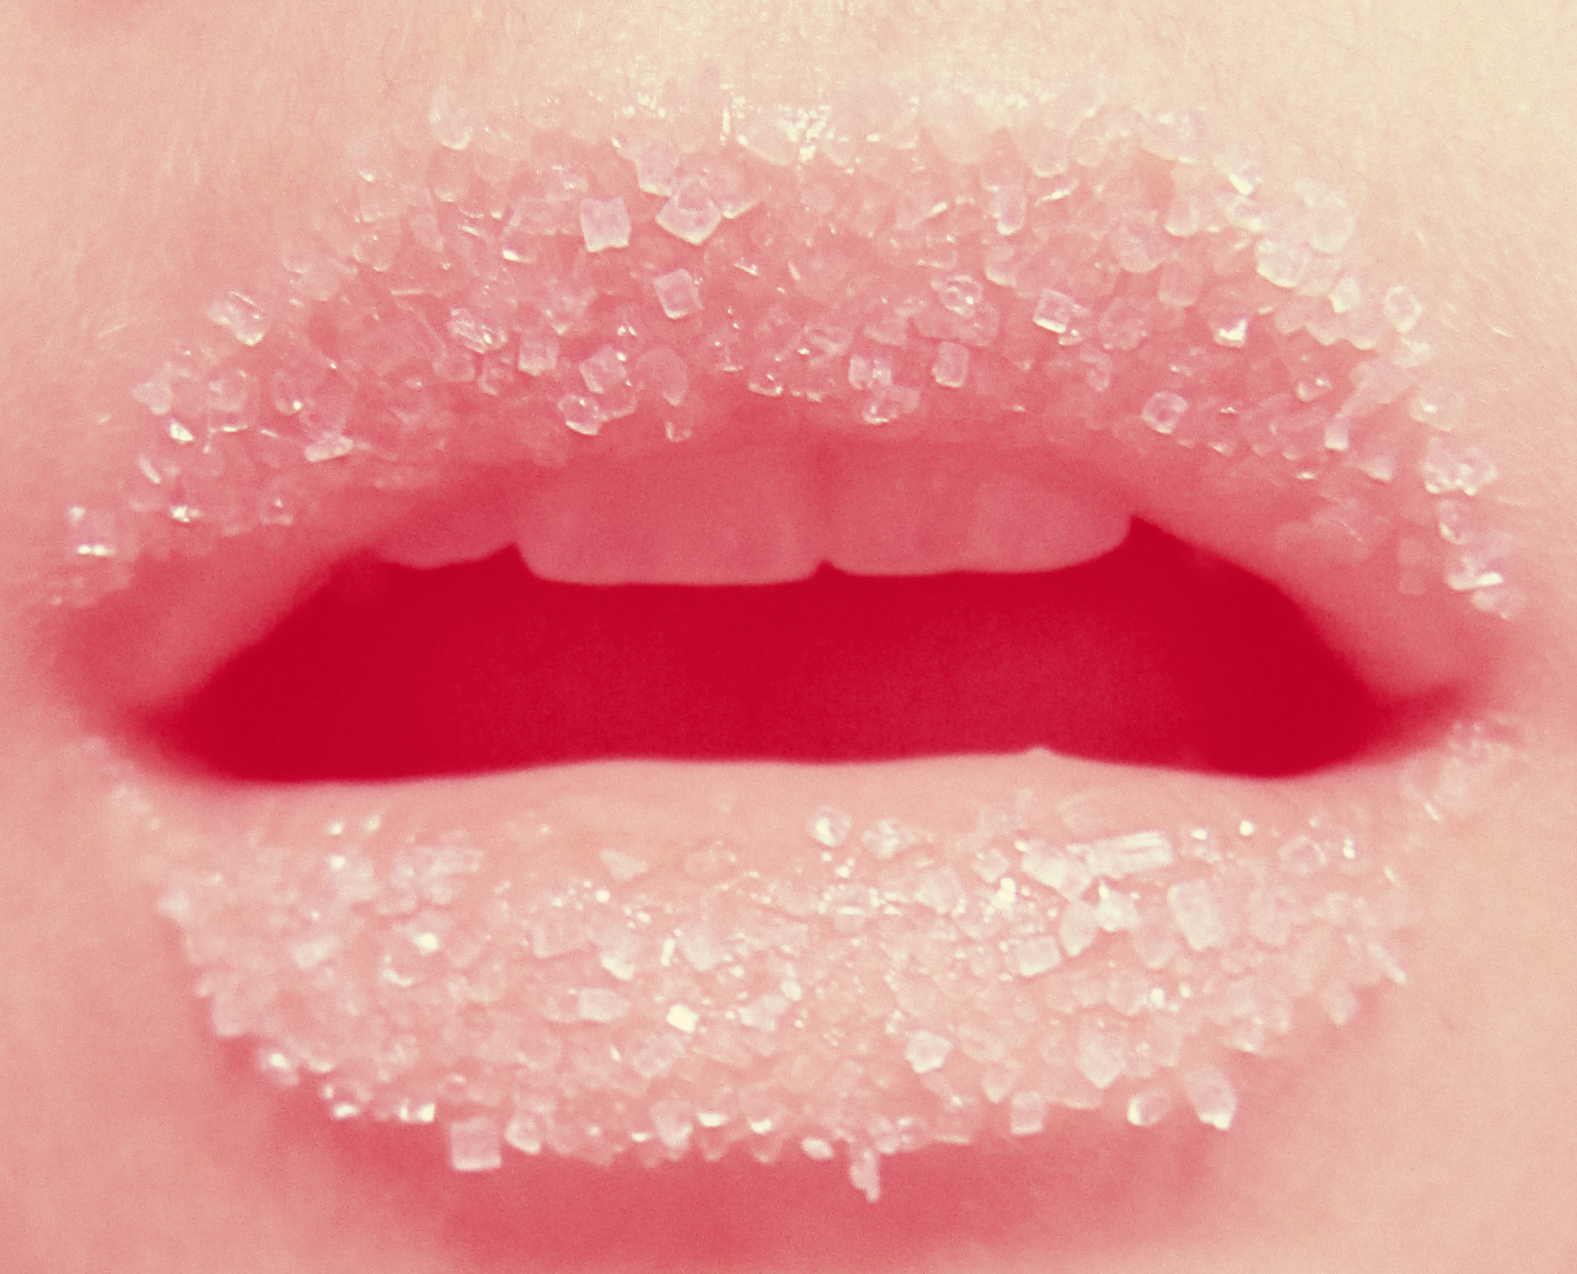 Sugar Lips Wallpapers Images Photos Pictures Backgrounds.